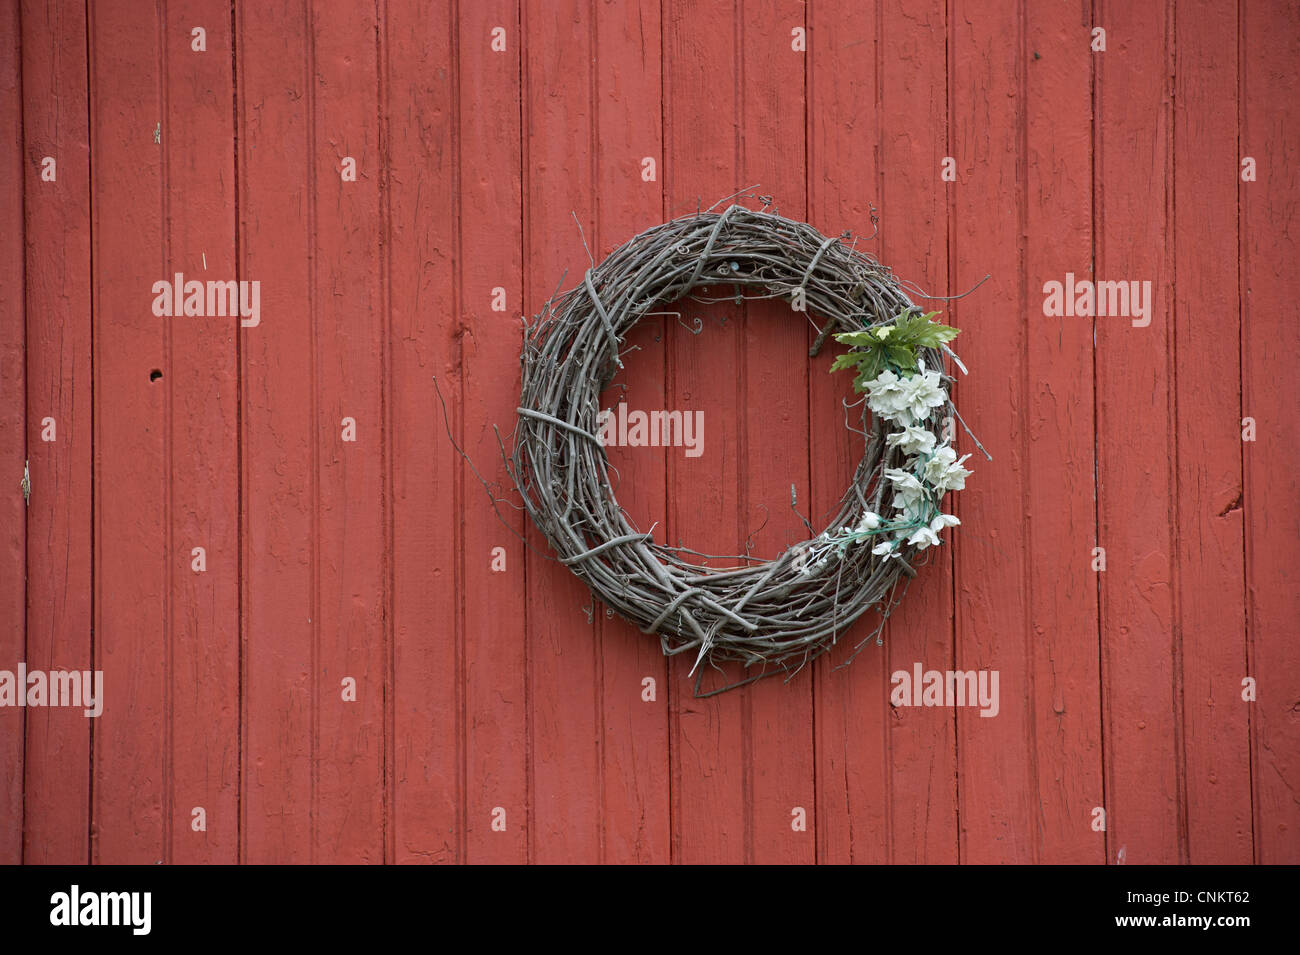 Grapevine wreath decoration hanging on a red barn door. Stock Photo